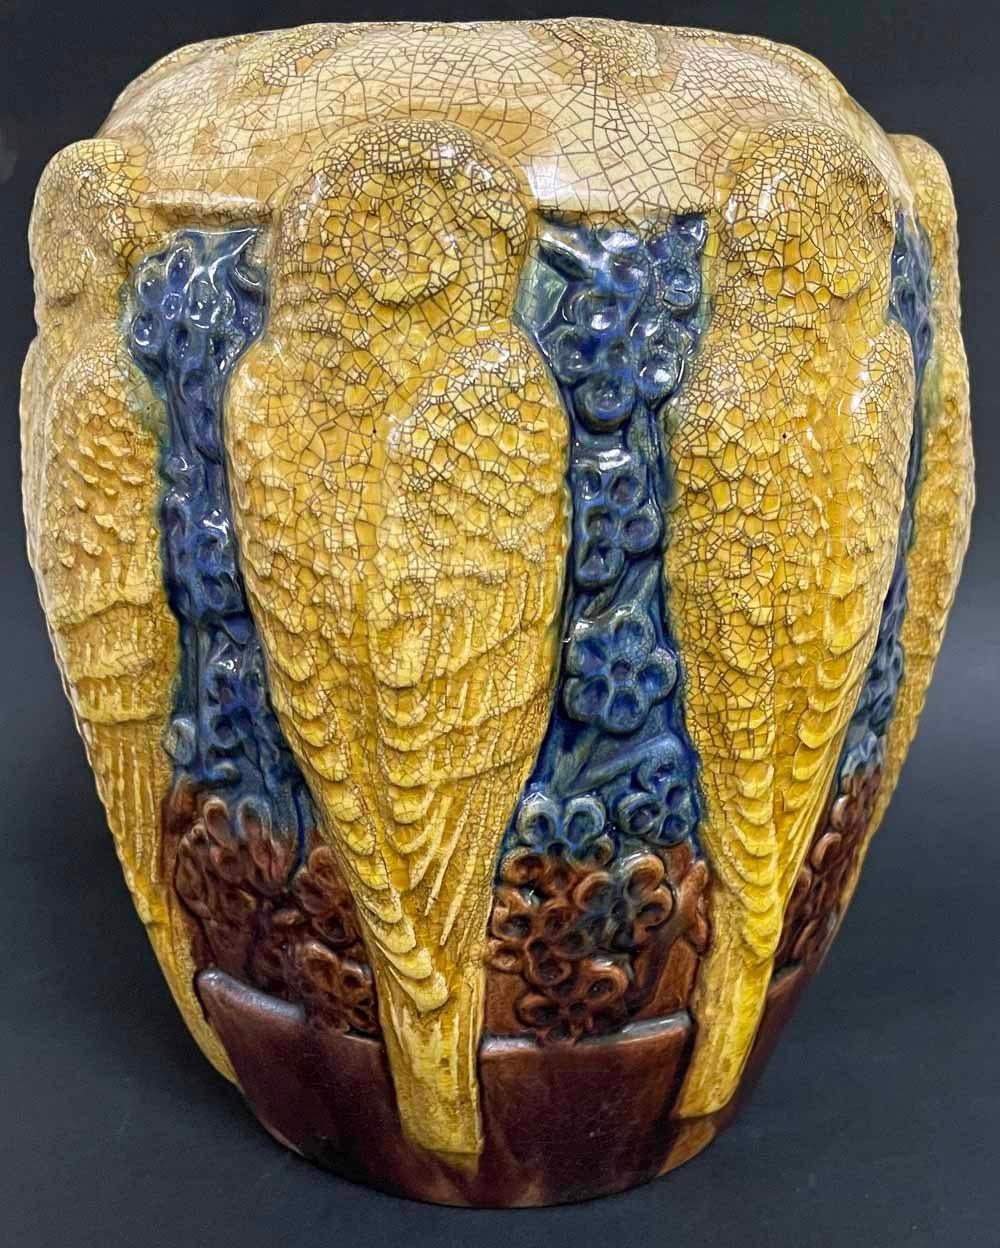 This large and striking vase -- the first example we have seen -- depicts a frieze-like line of golden parakeets or small parrots arrayed against a deep blue ground of flower forms.  The relief is high and bold, and the glazes are further enriched